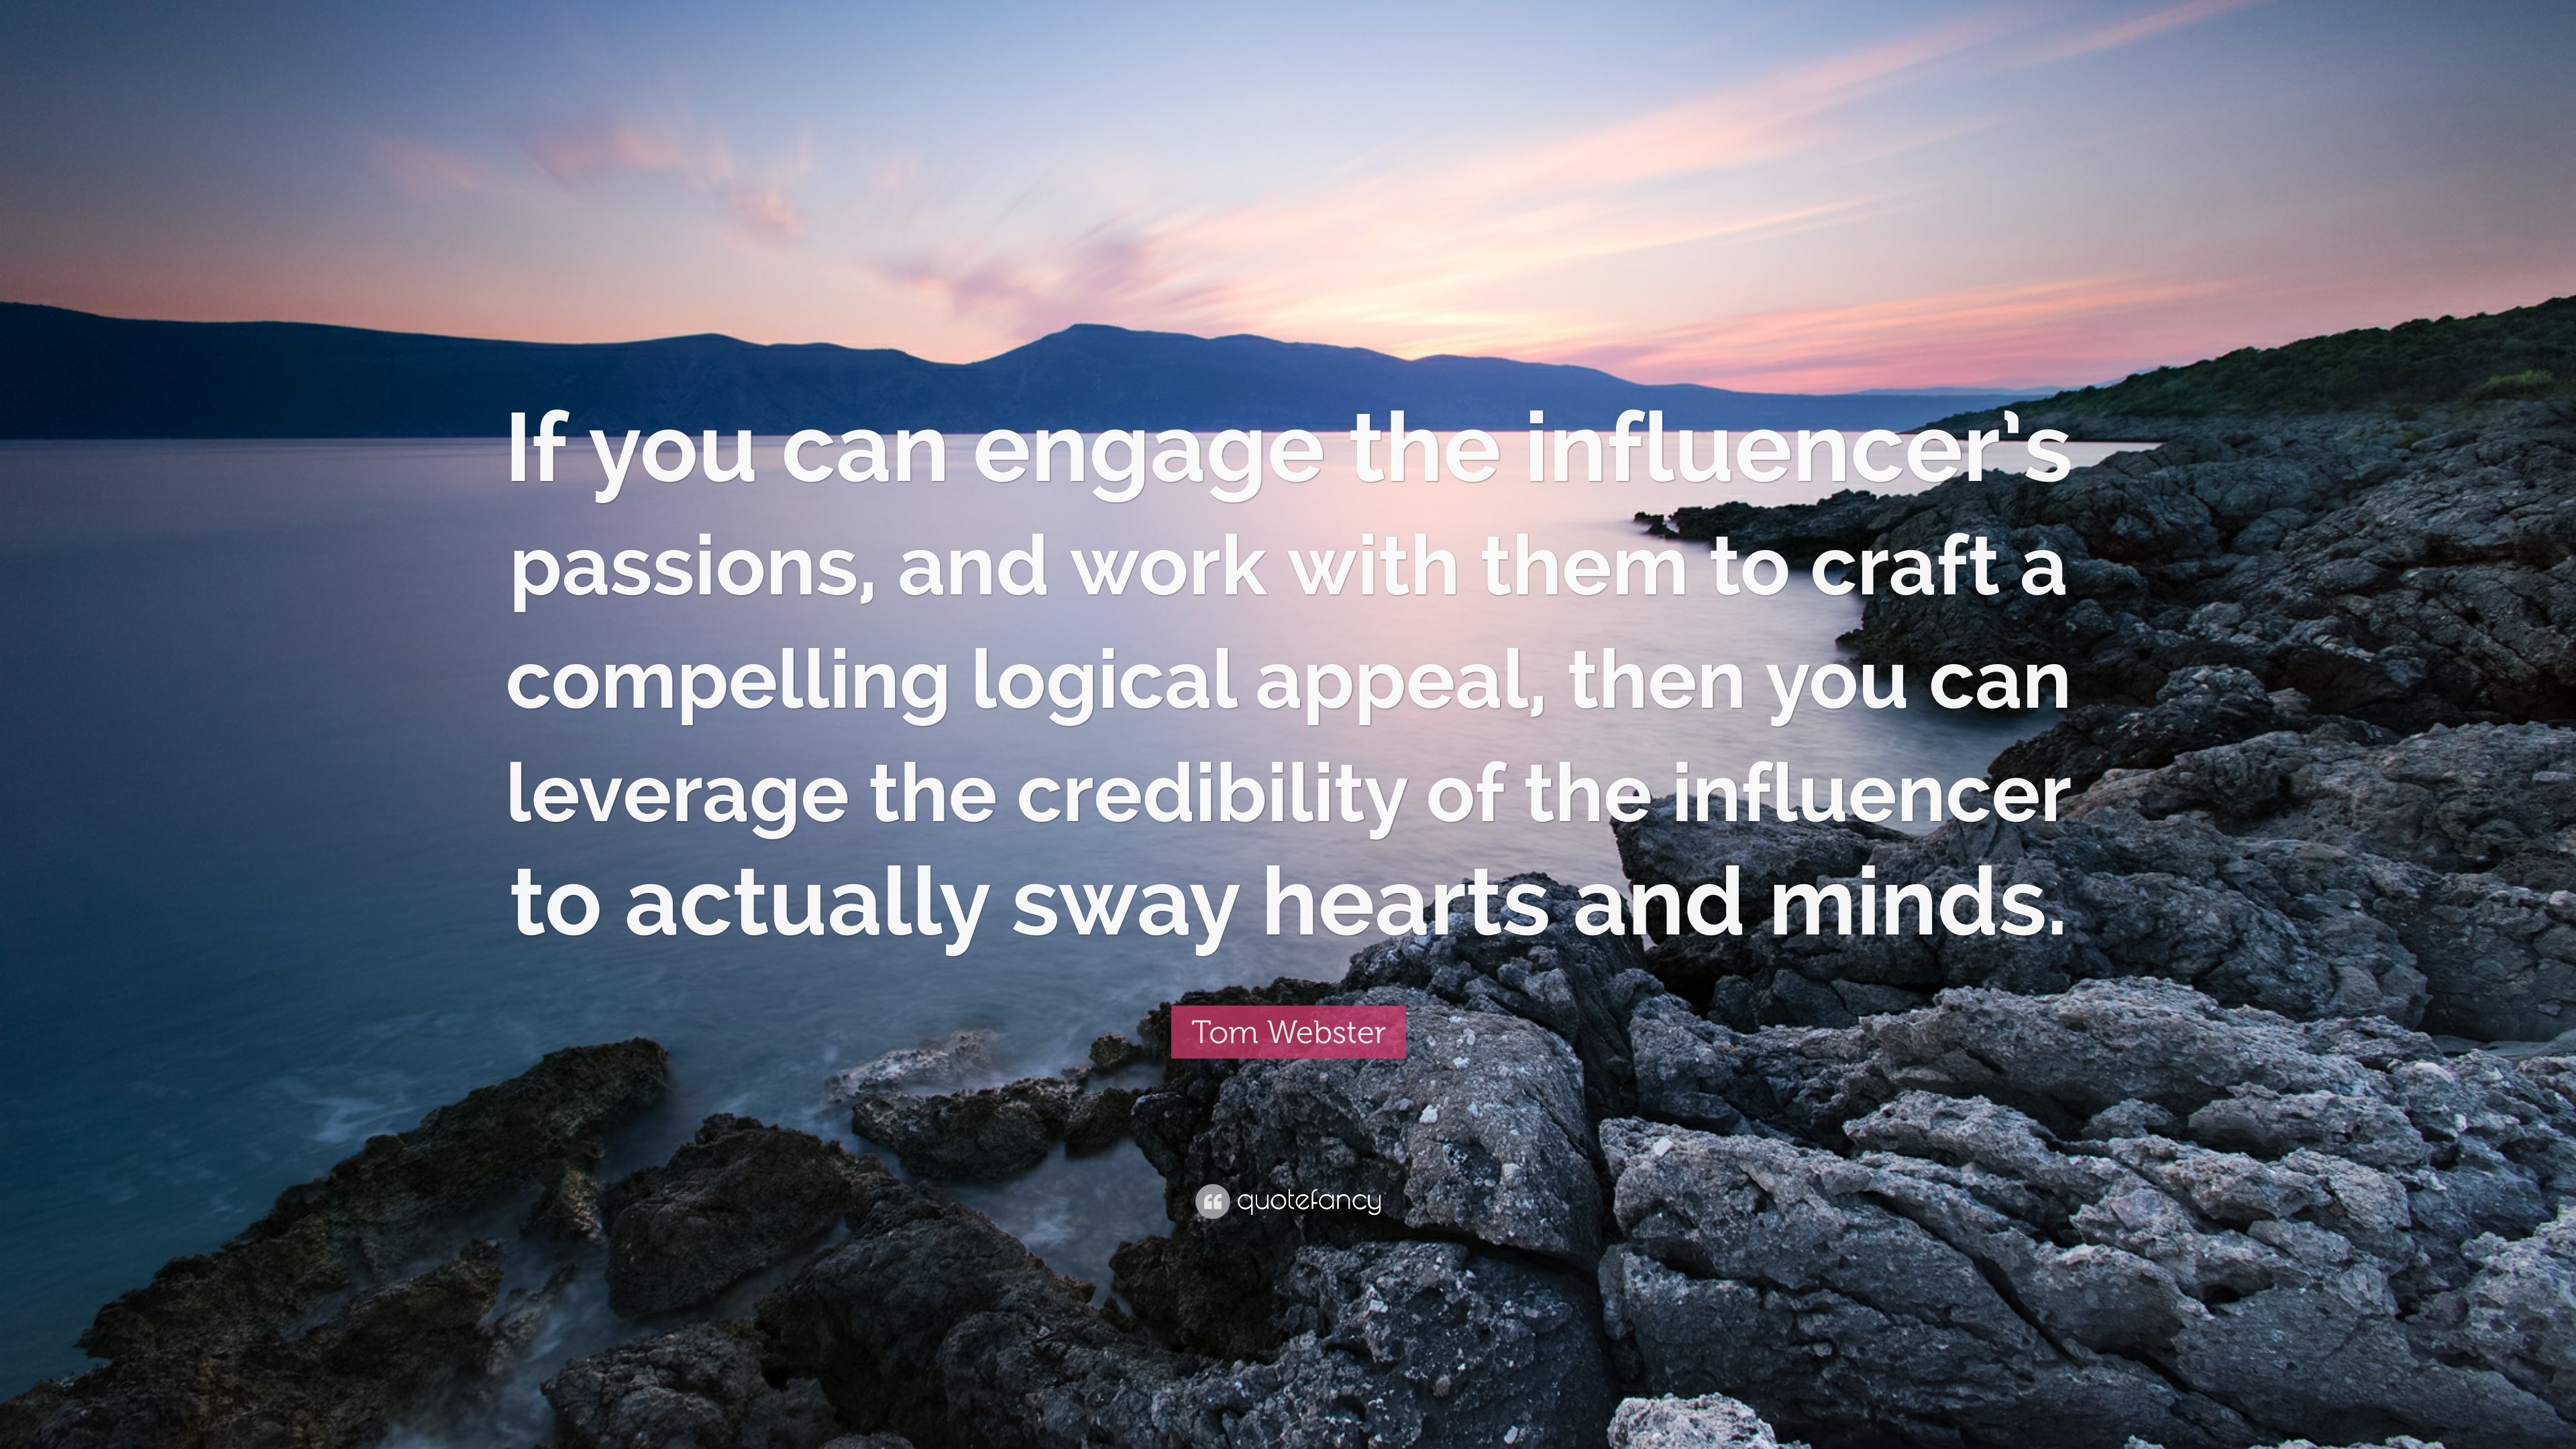 Tom Webster Quote: “If you can engage the influencer's passions, and work with them to craft a compelling logical appeal, then you can lever.” (7 wallpaper)